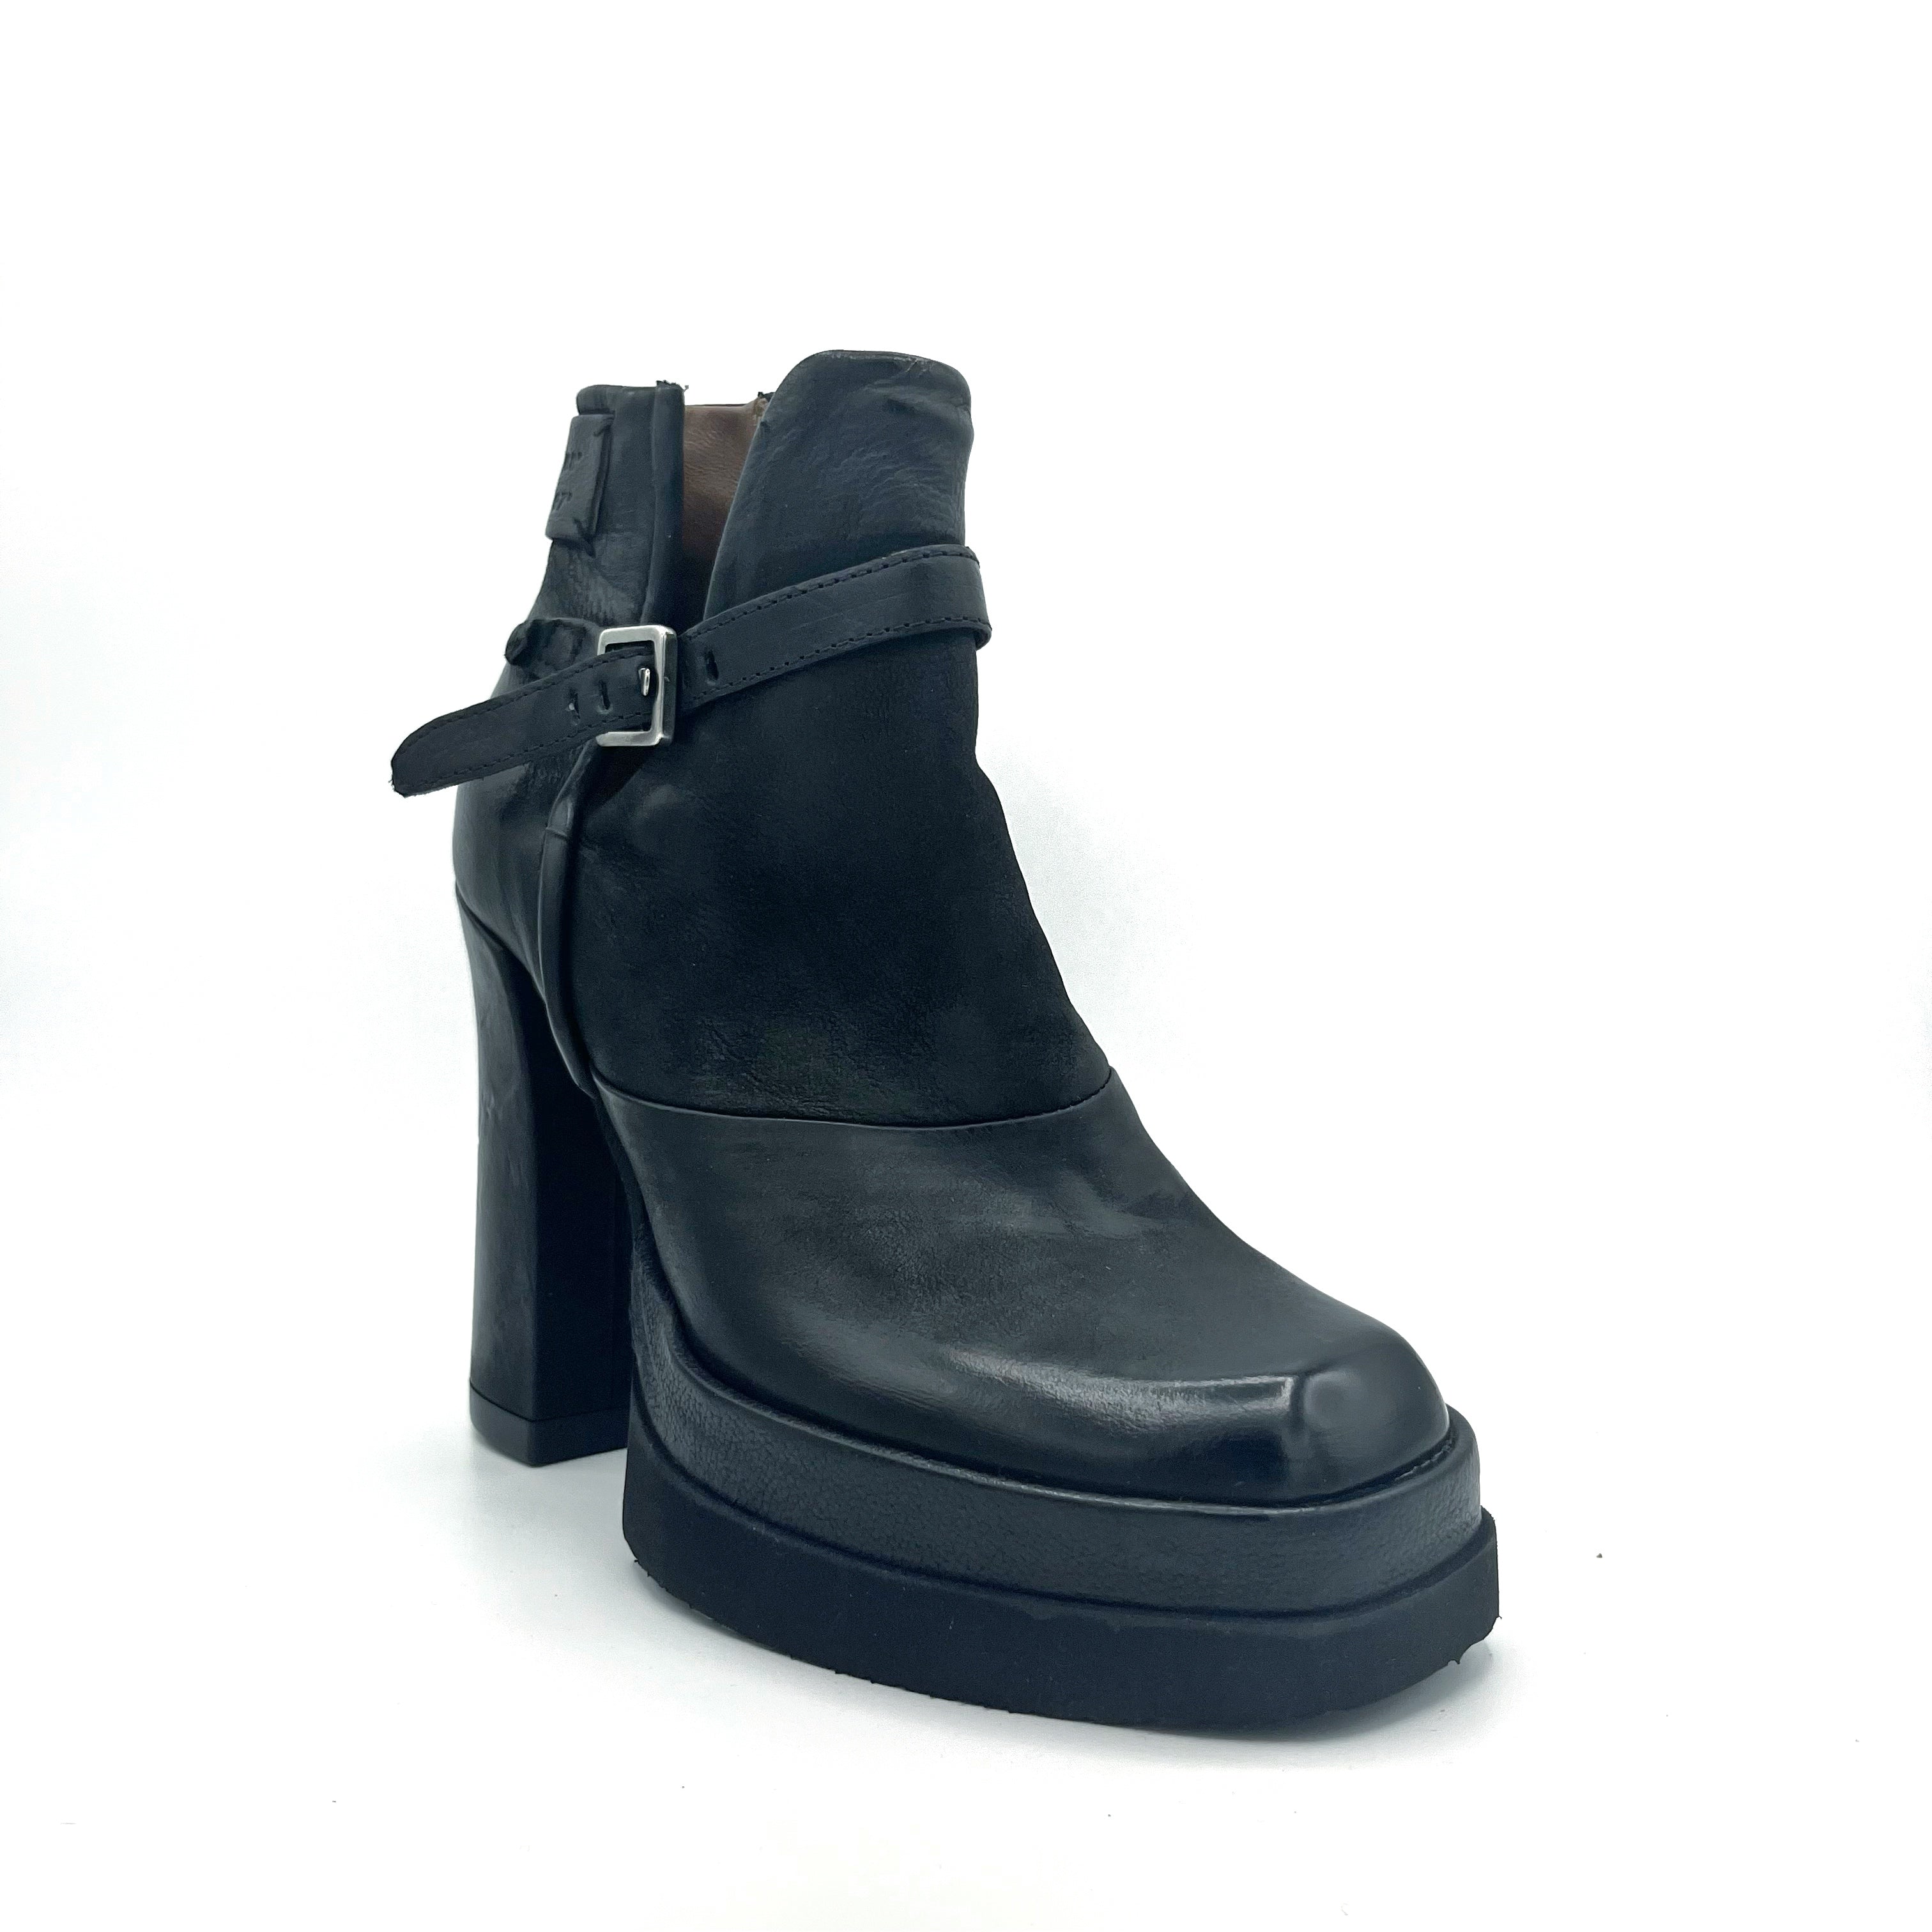 Outer front side view of the A.S.98 Vinal High-heeled Bootie in Black